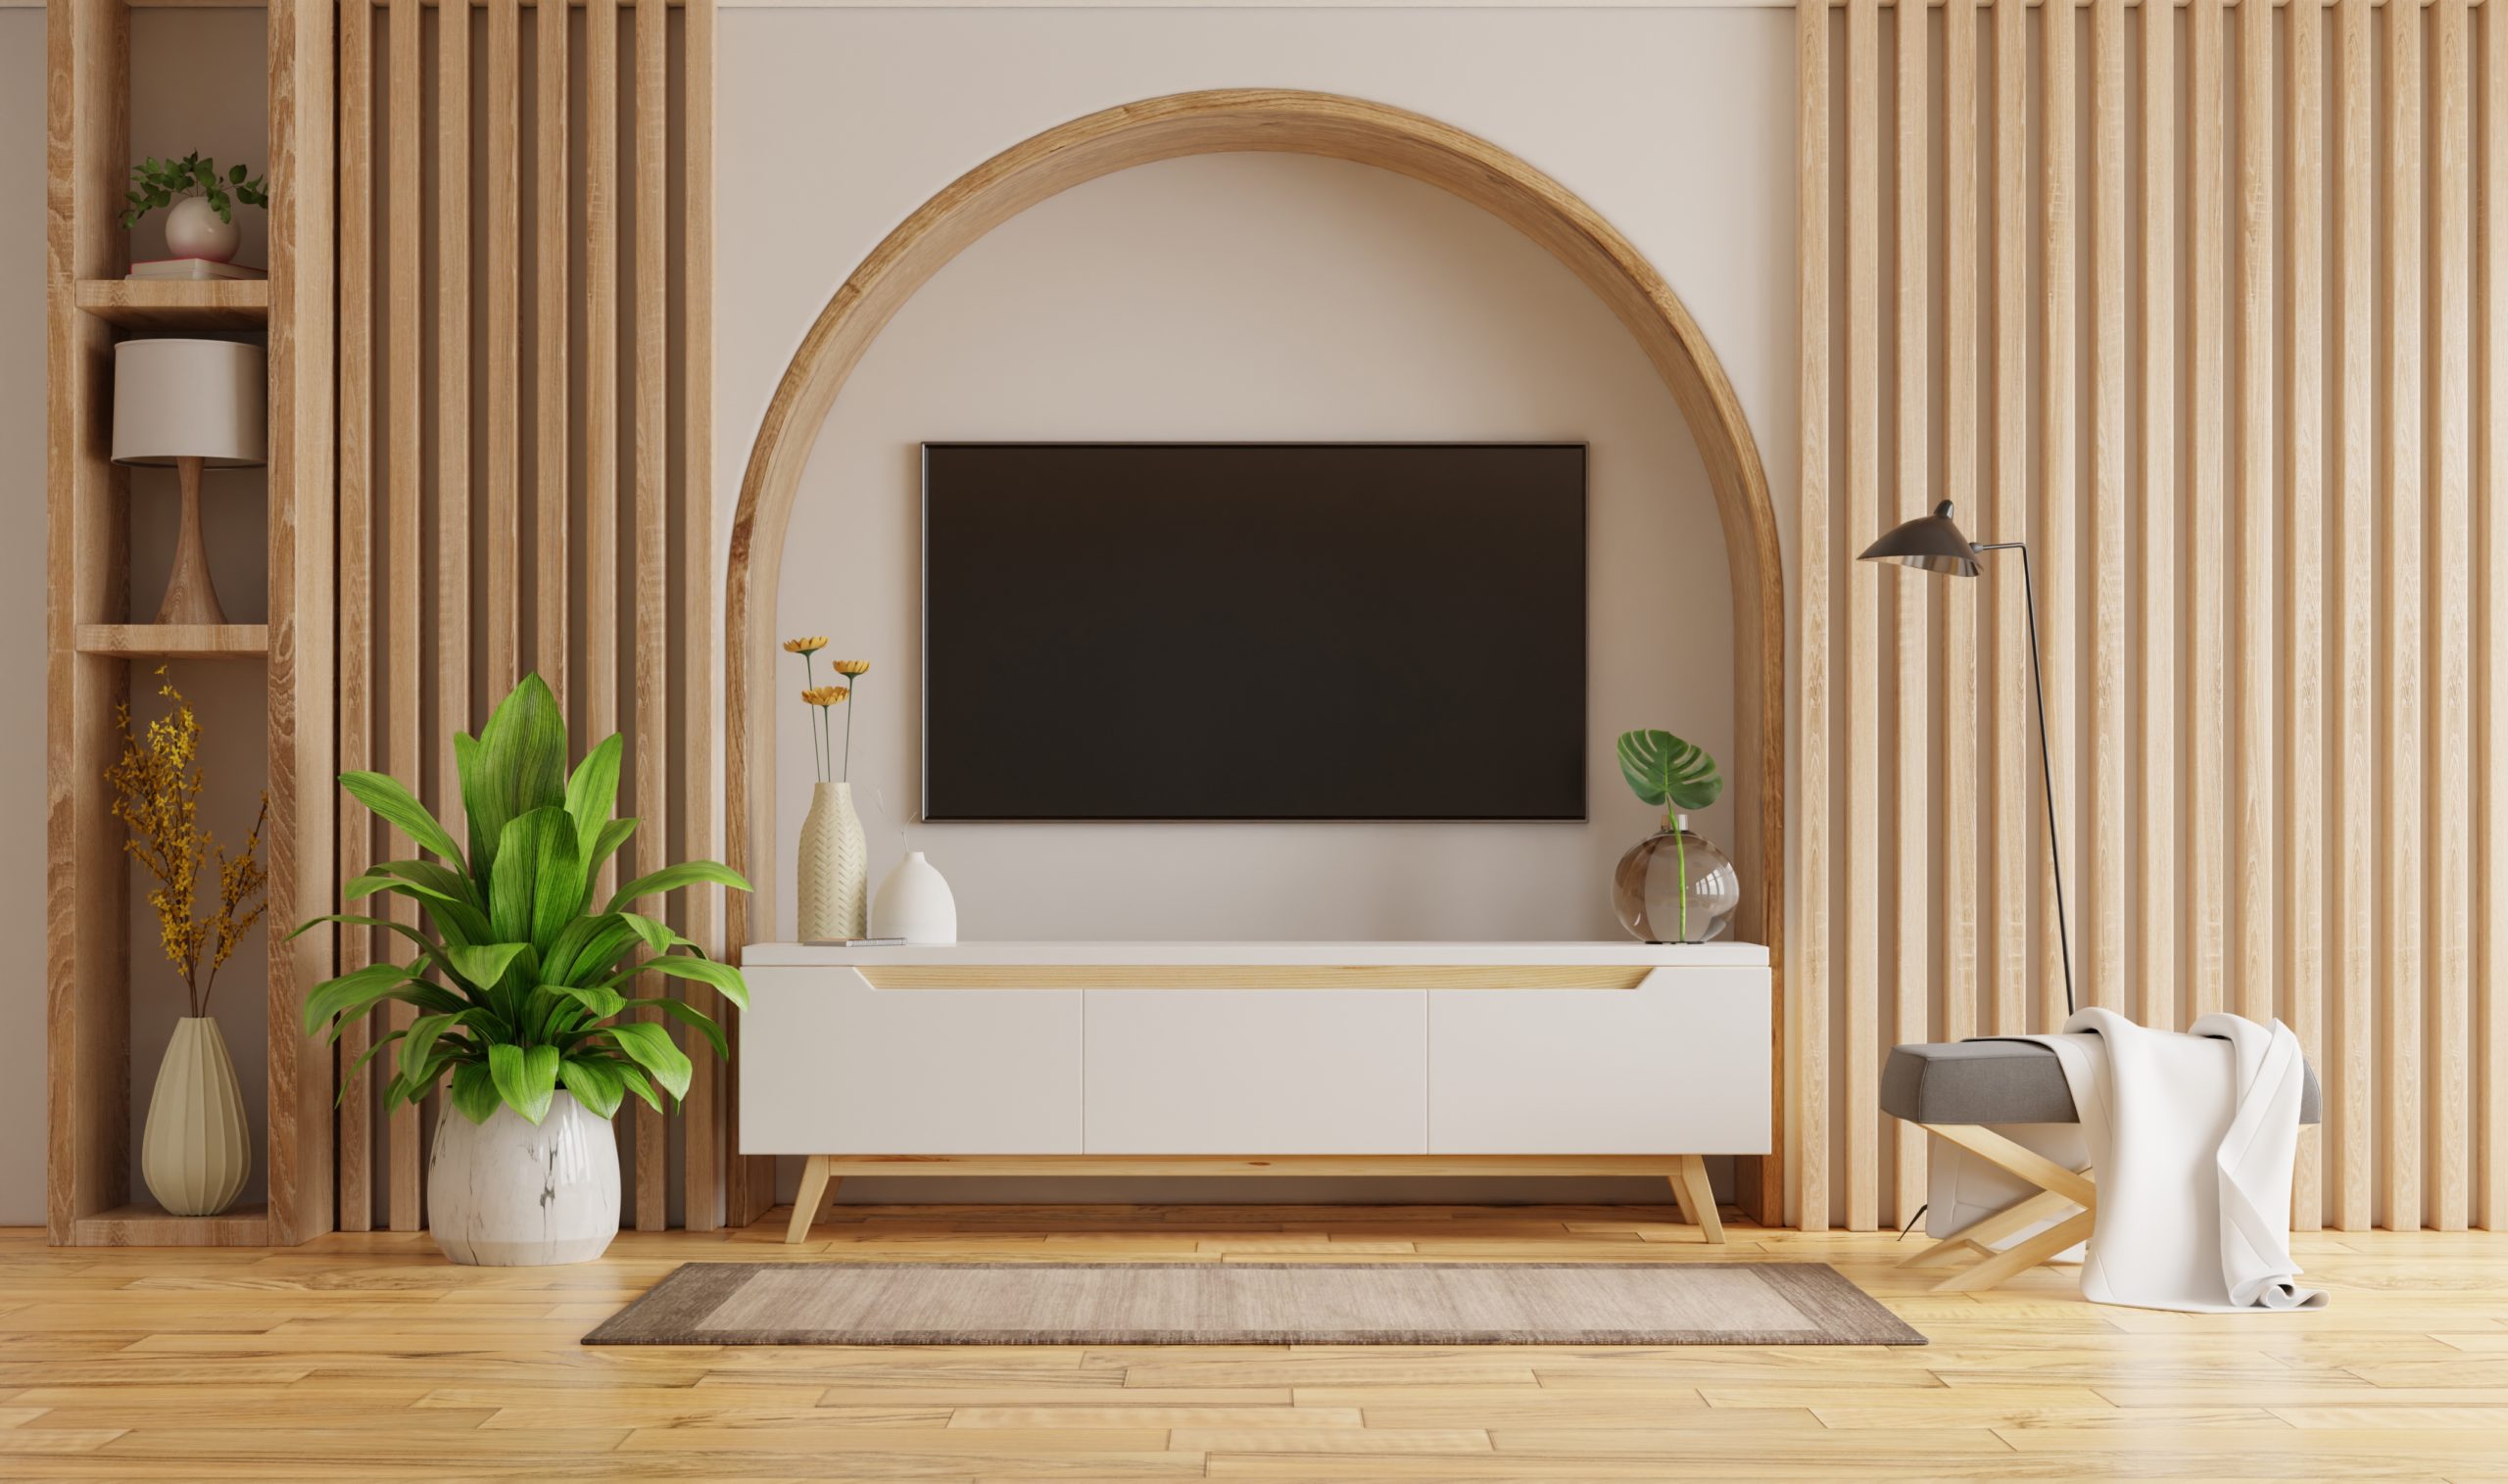 living-room-interior-with-tv-cabinet-decorative-lath-empty-white-wall-background-3d-rendering-scaled